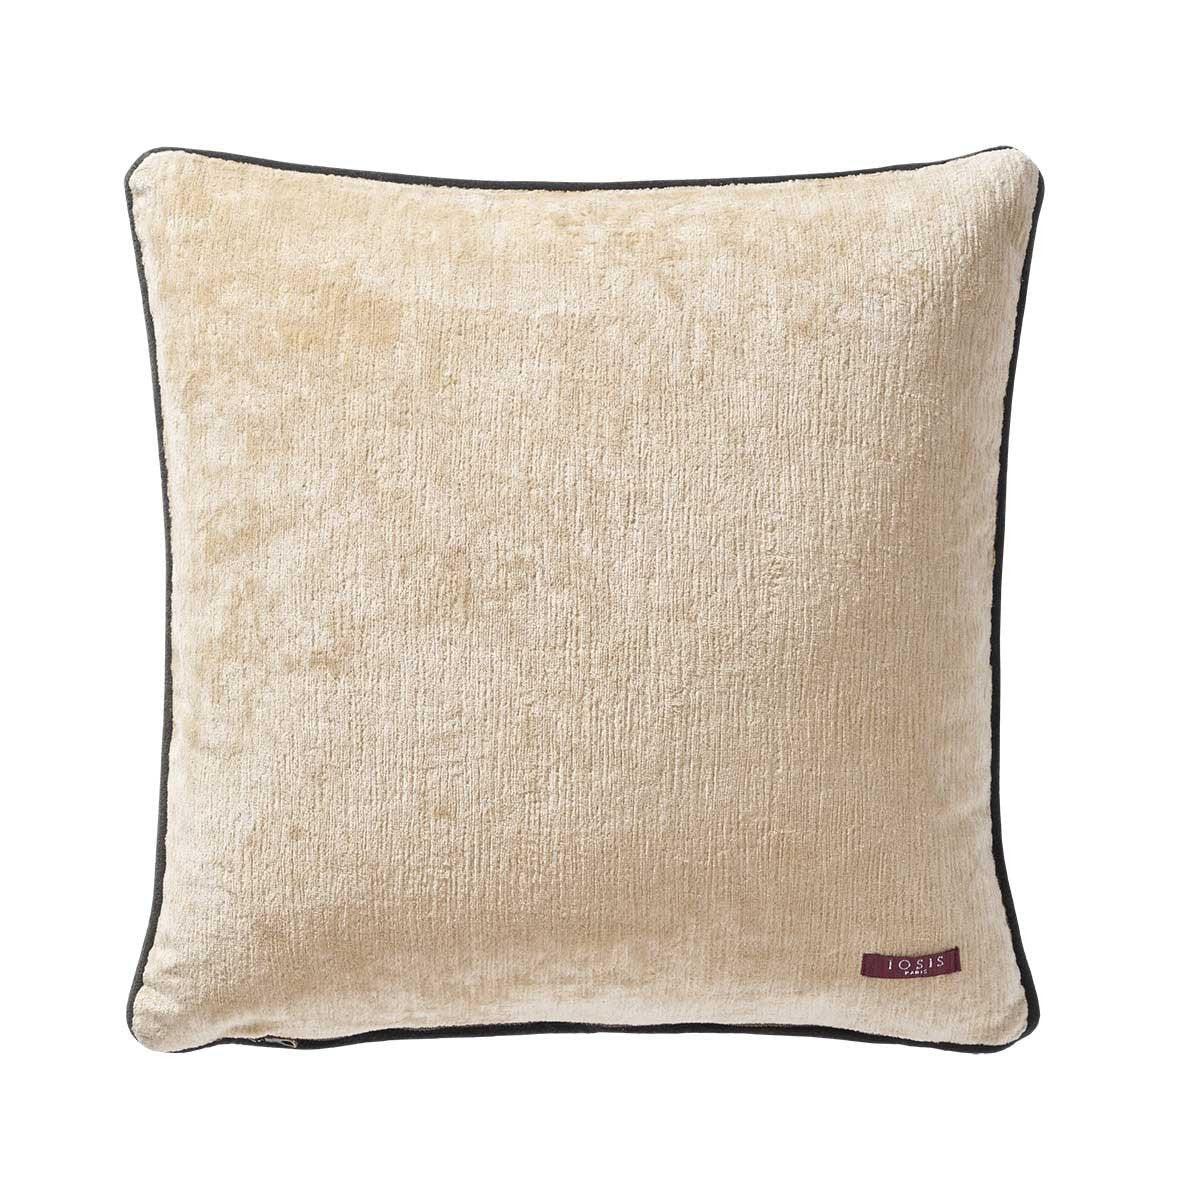 Fig Linens - Boromee Greige Decorative Pillow by Iosis - Back